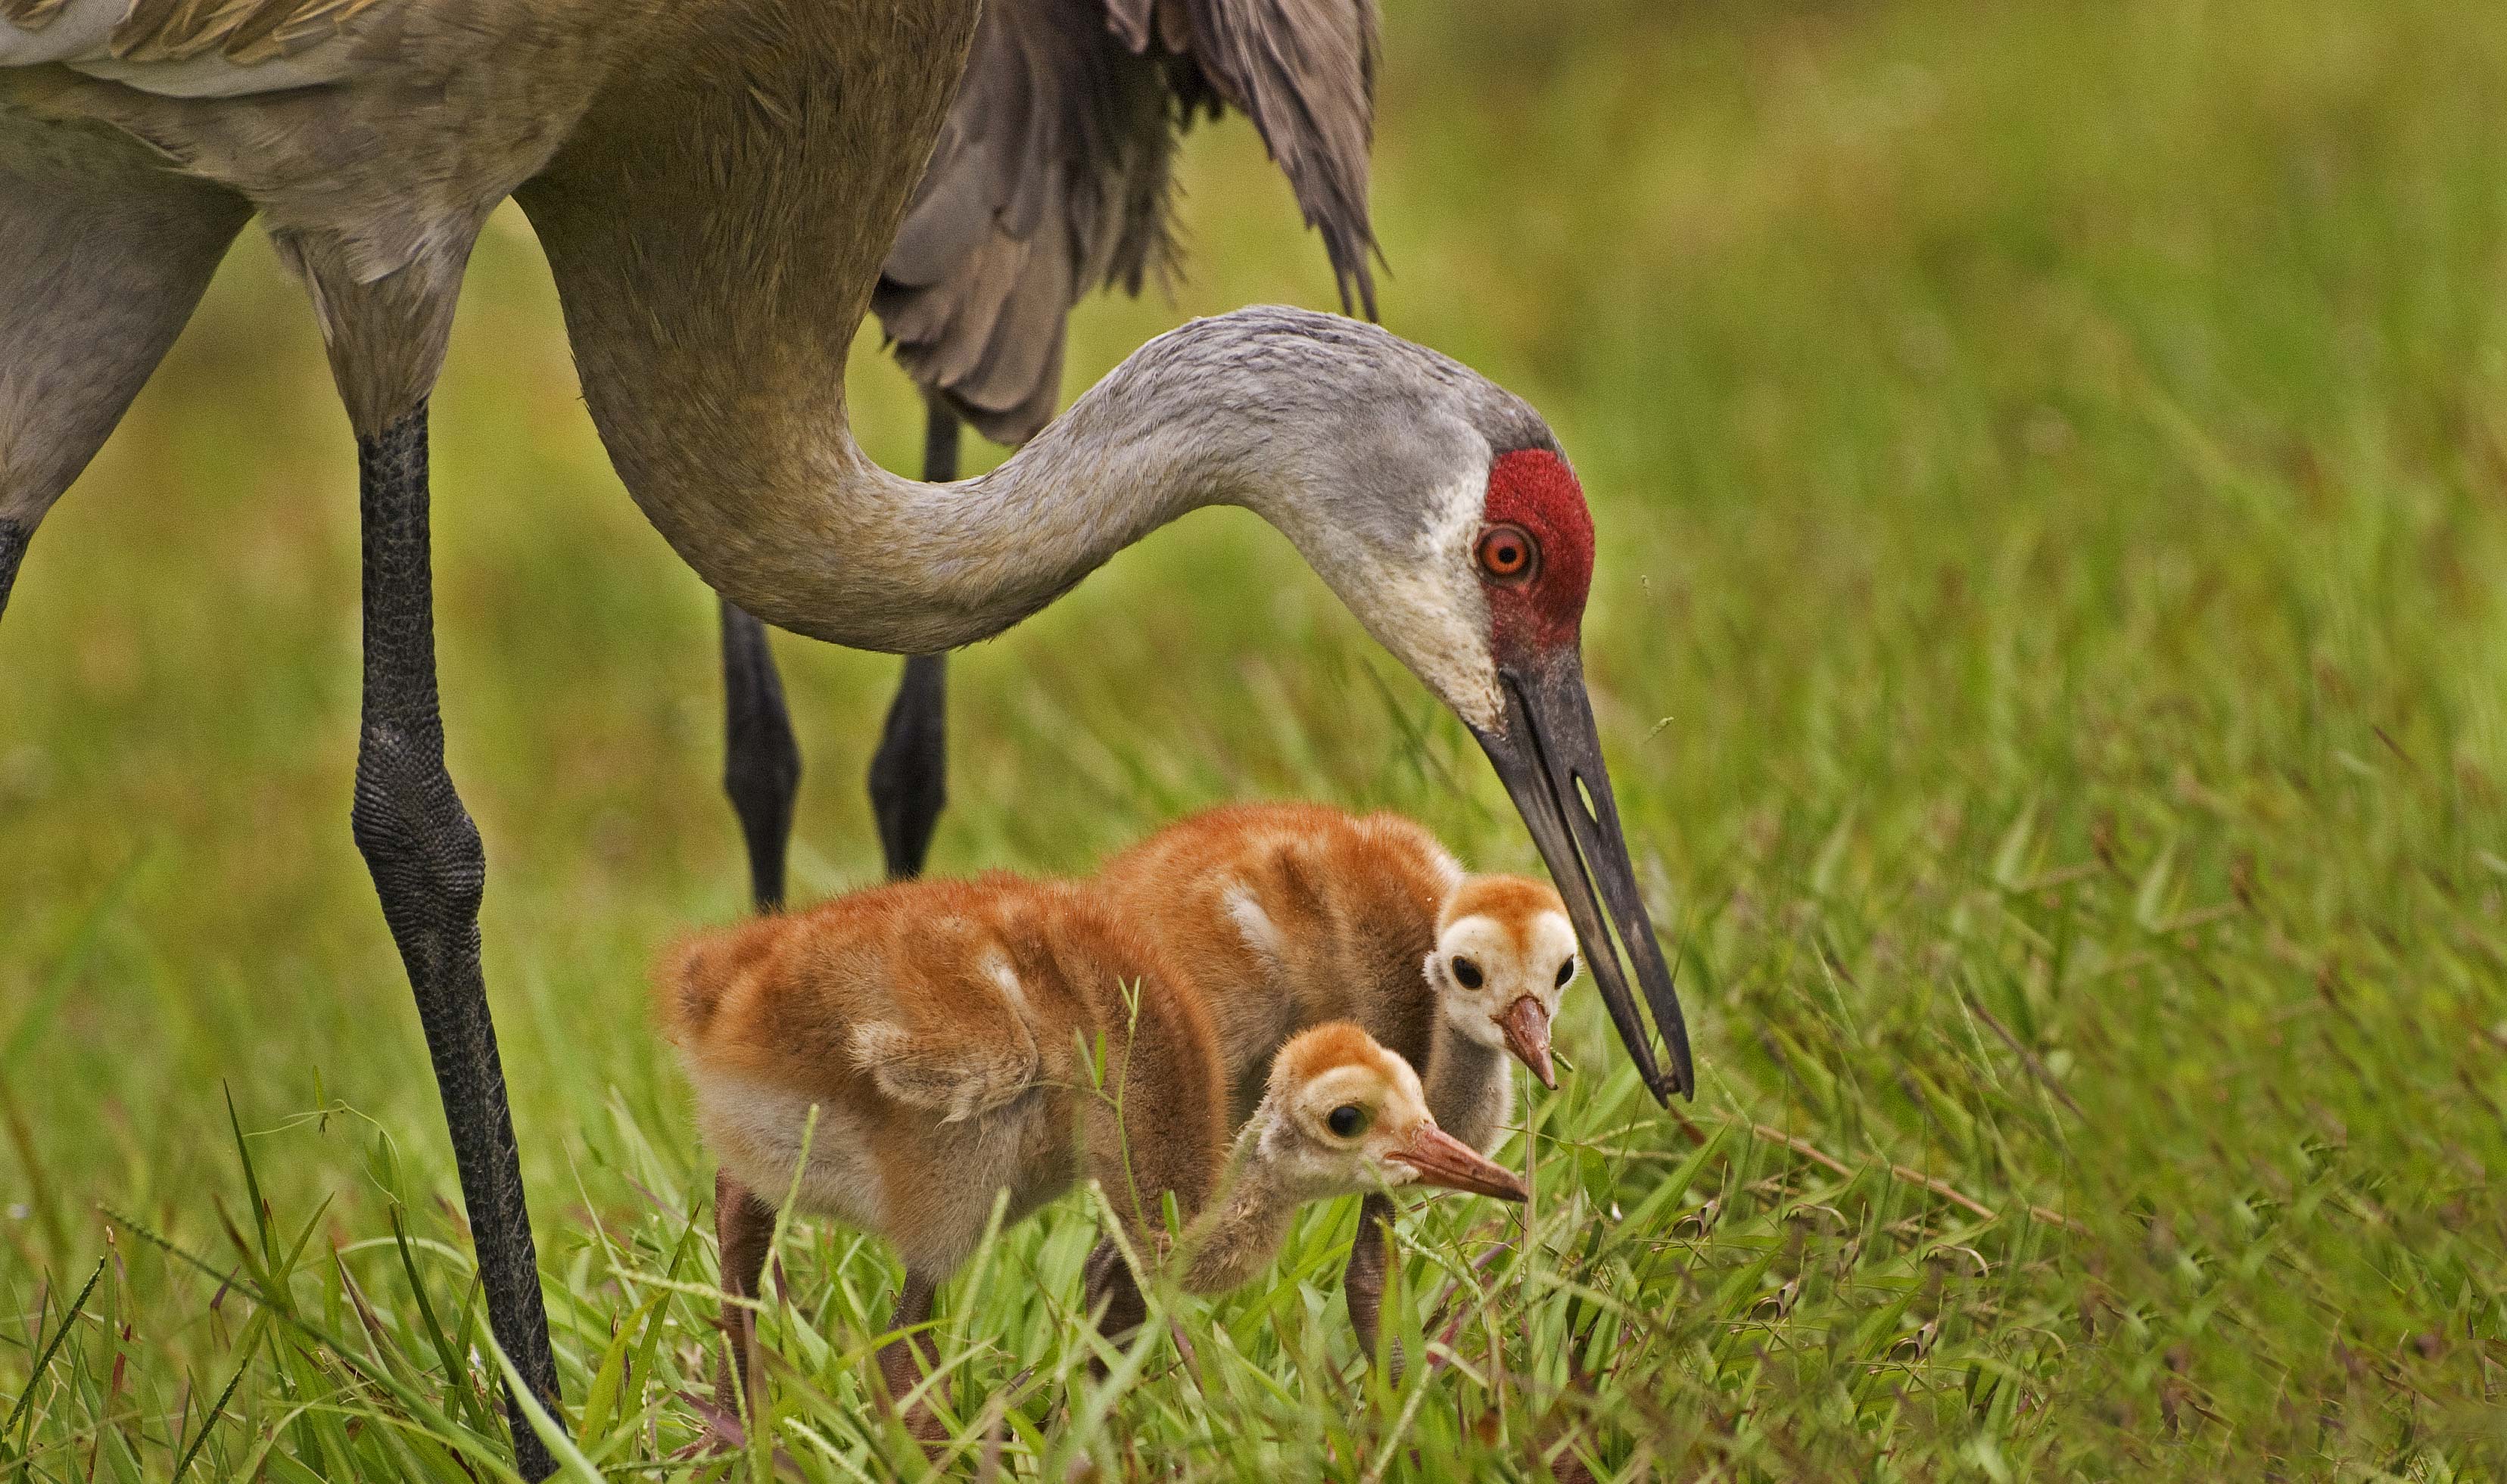 A sandhill crane with its colts.